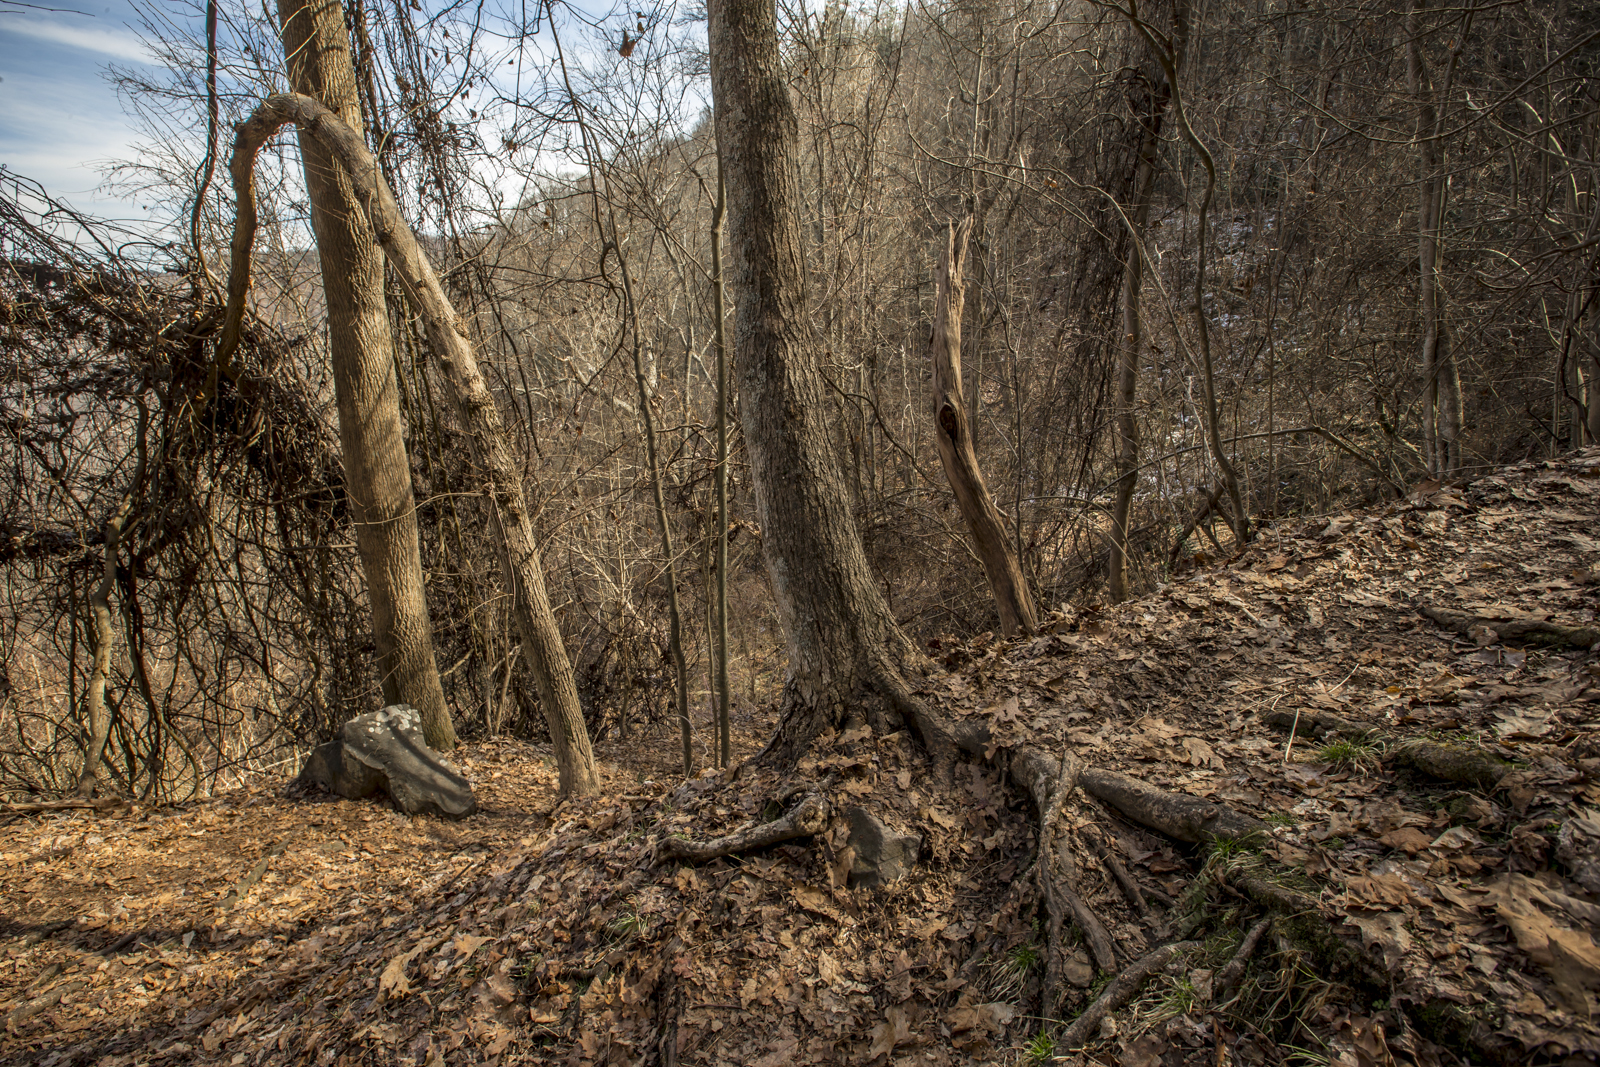 trees-along-kaymoor-miners-trail-in-fayetteville-west-virginia-on-march-14-2014-after-noon.jpg